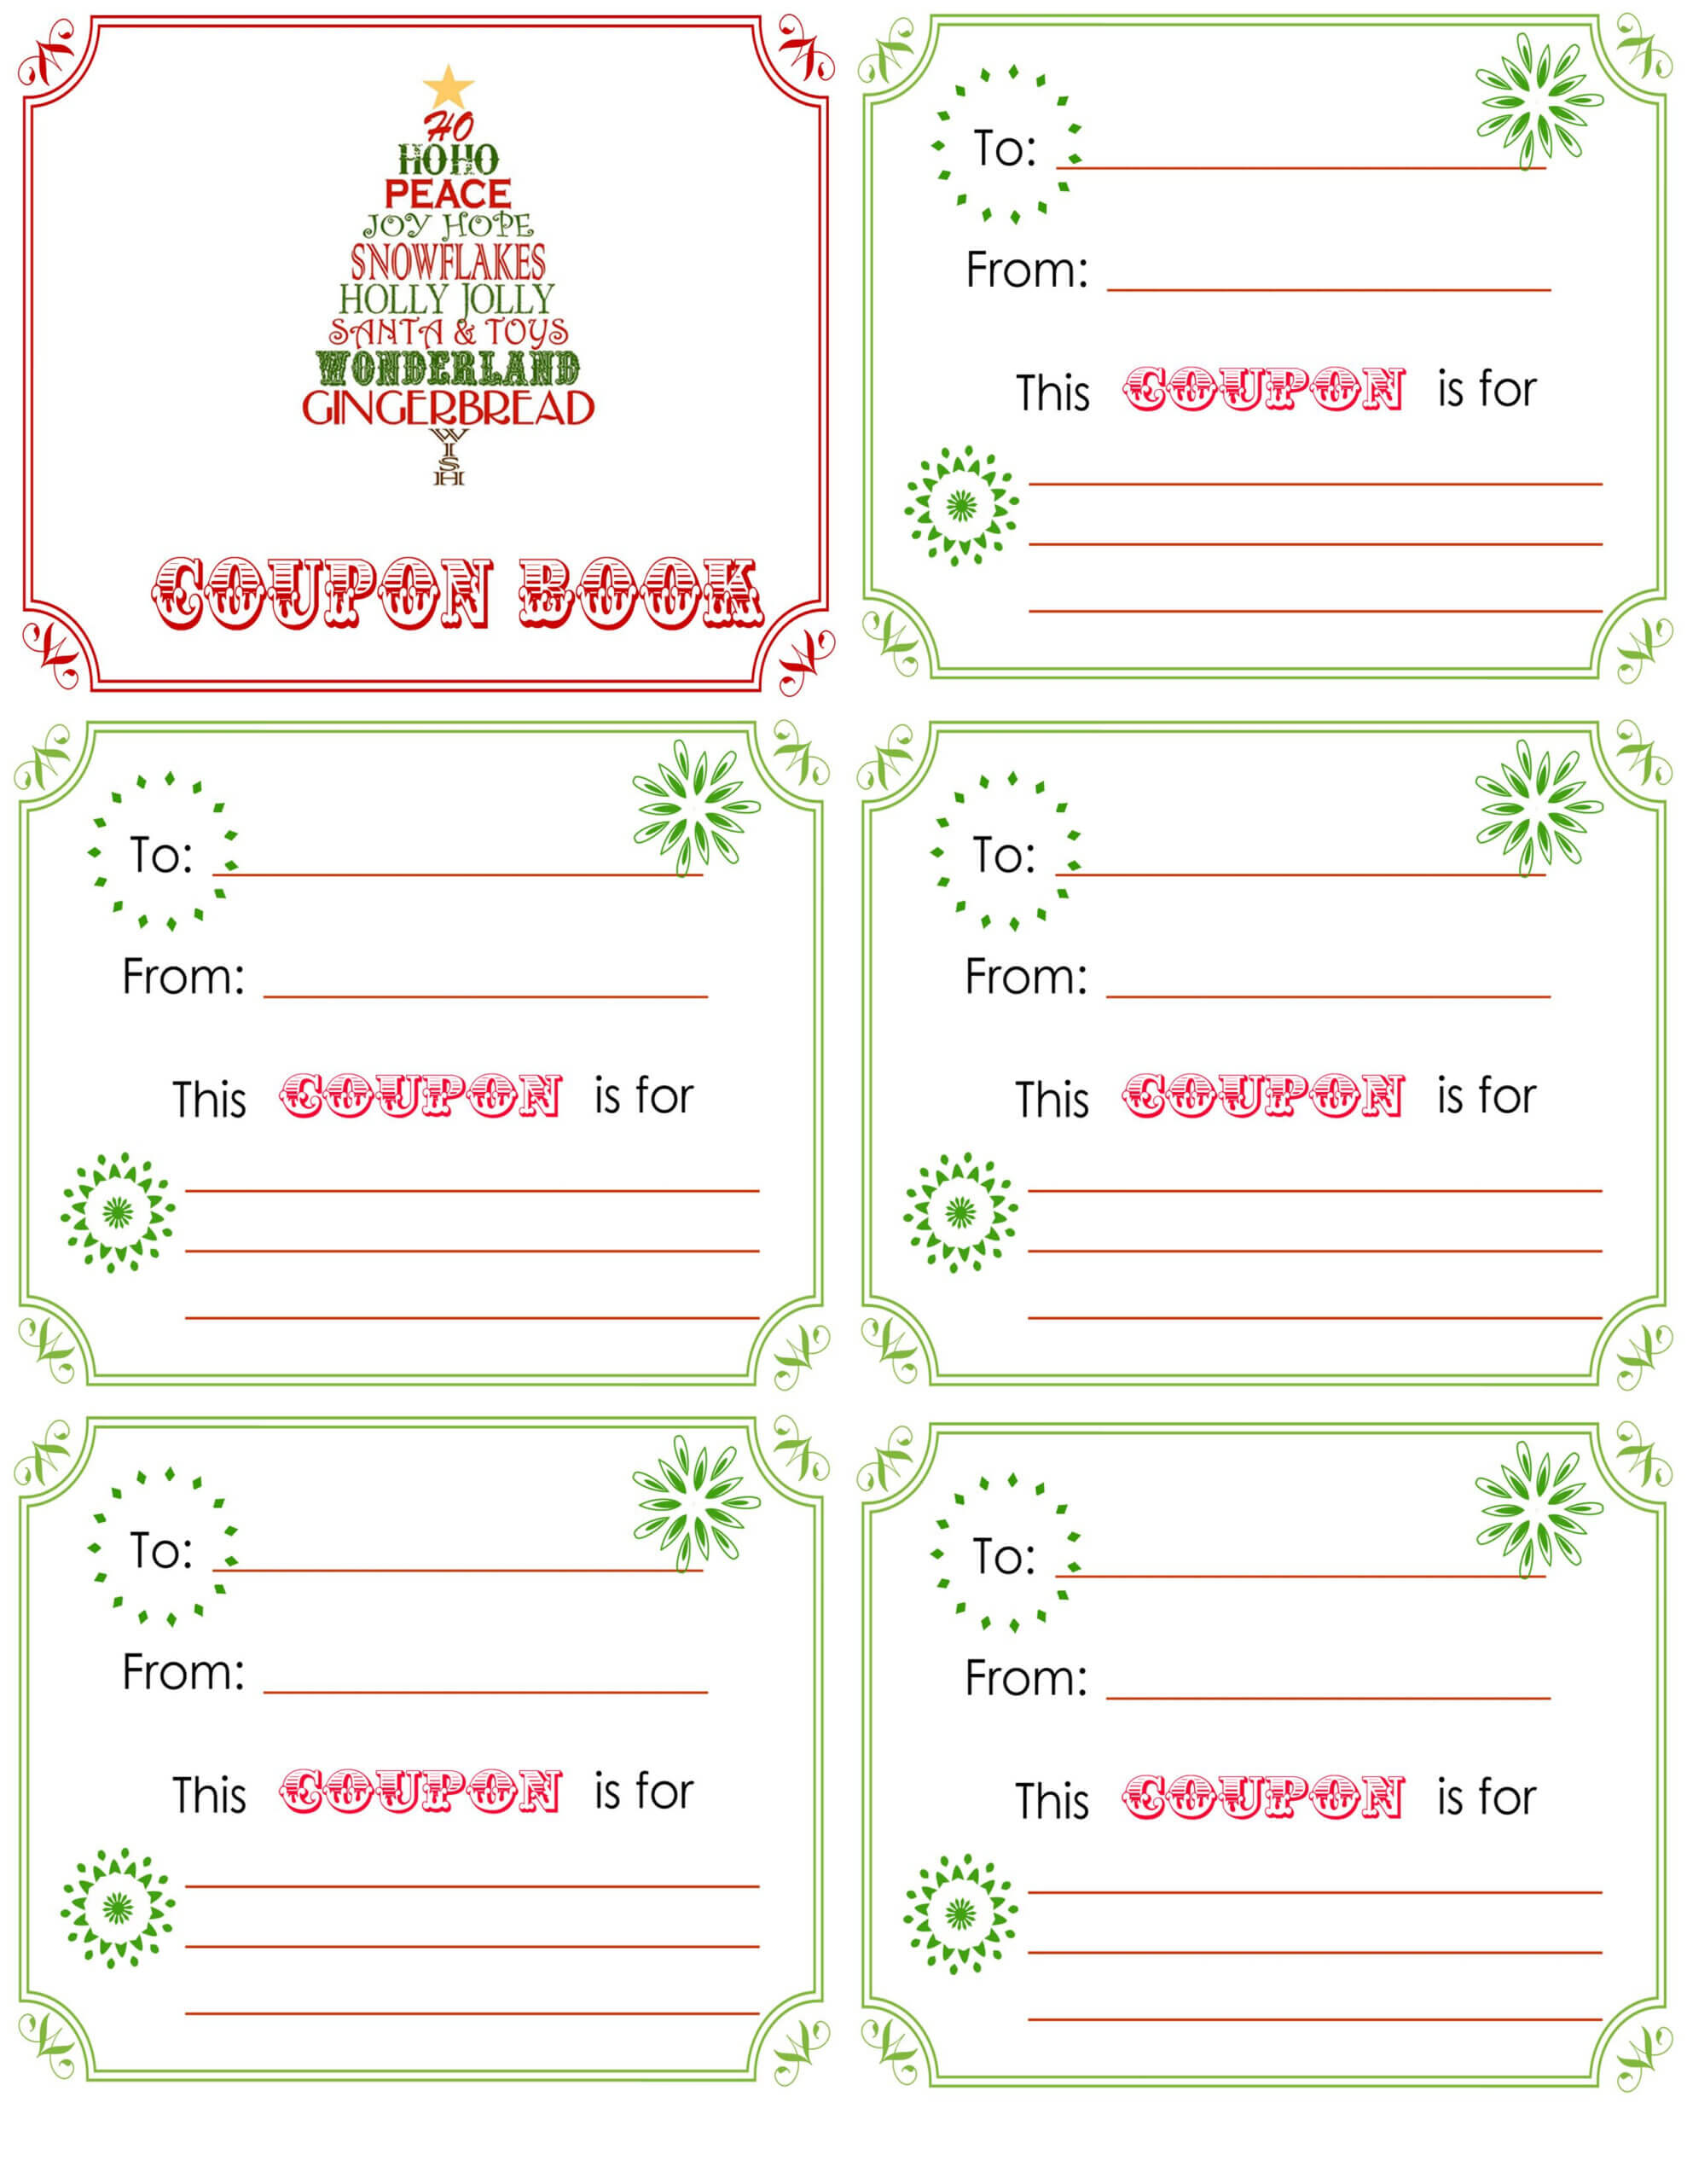 Printable Christmas Coupon Book. L Is Getting 15 Minute Throughout Coupon Book Template Word